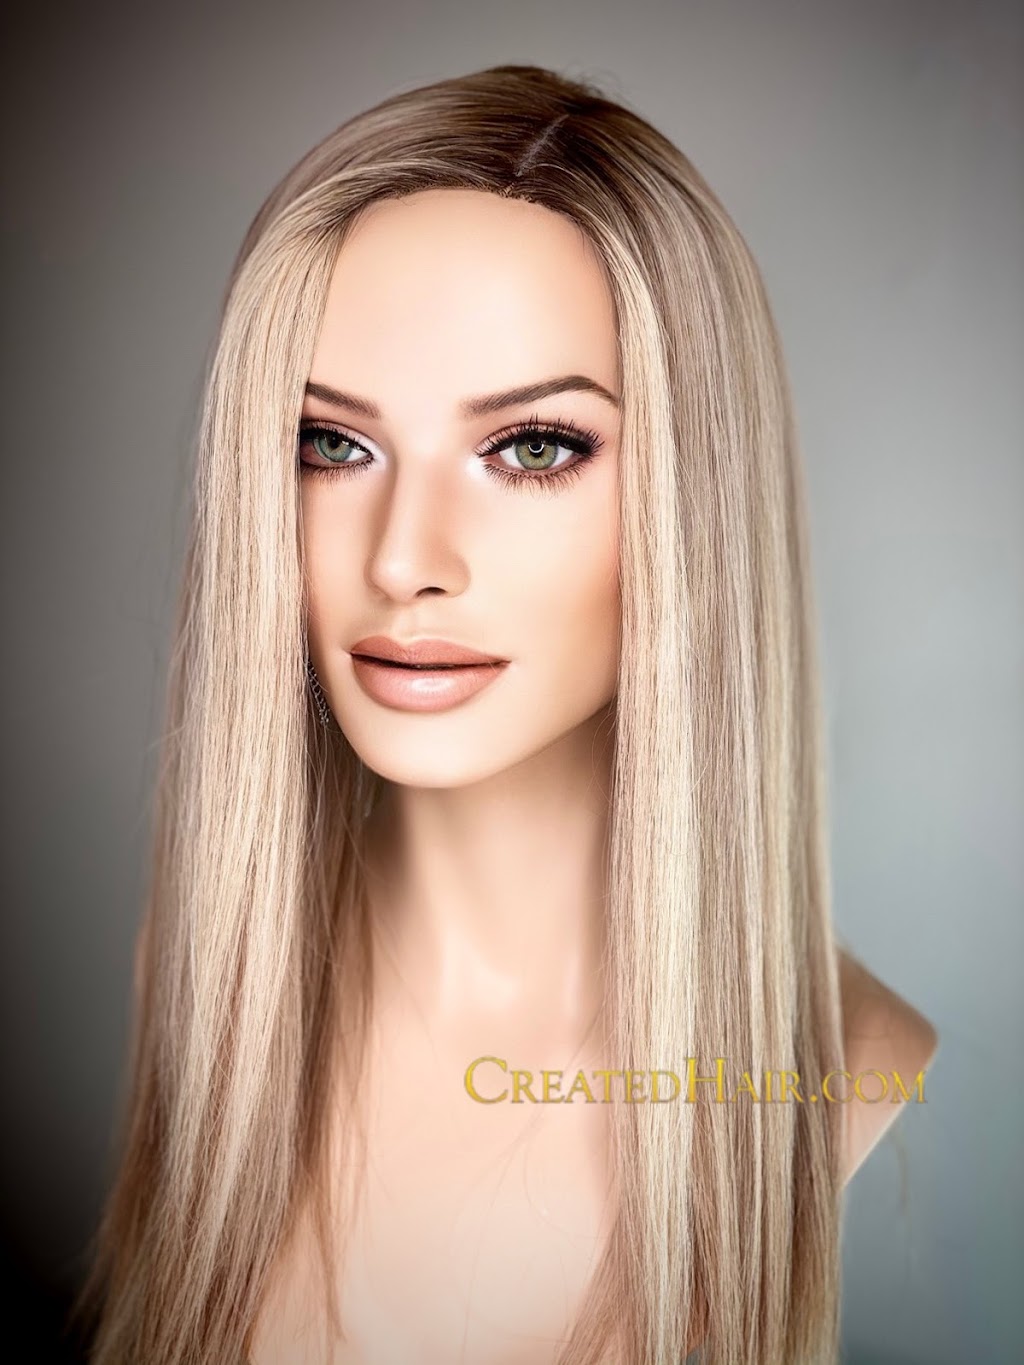 CreatedHair by Amy Gibson | 10390 Wilshire Blvd Suite 306, Los Angeles, CA 90024, USA | Phone: (877) 367-9447